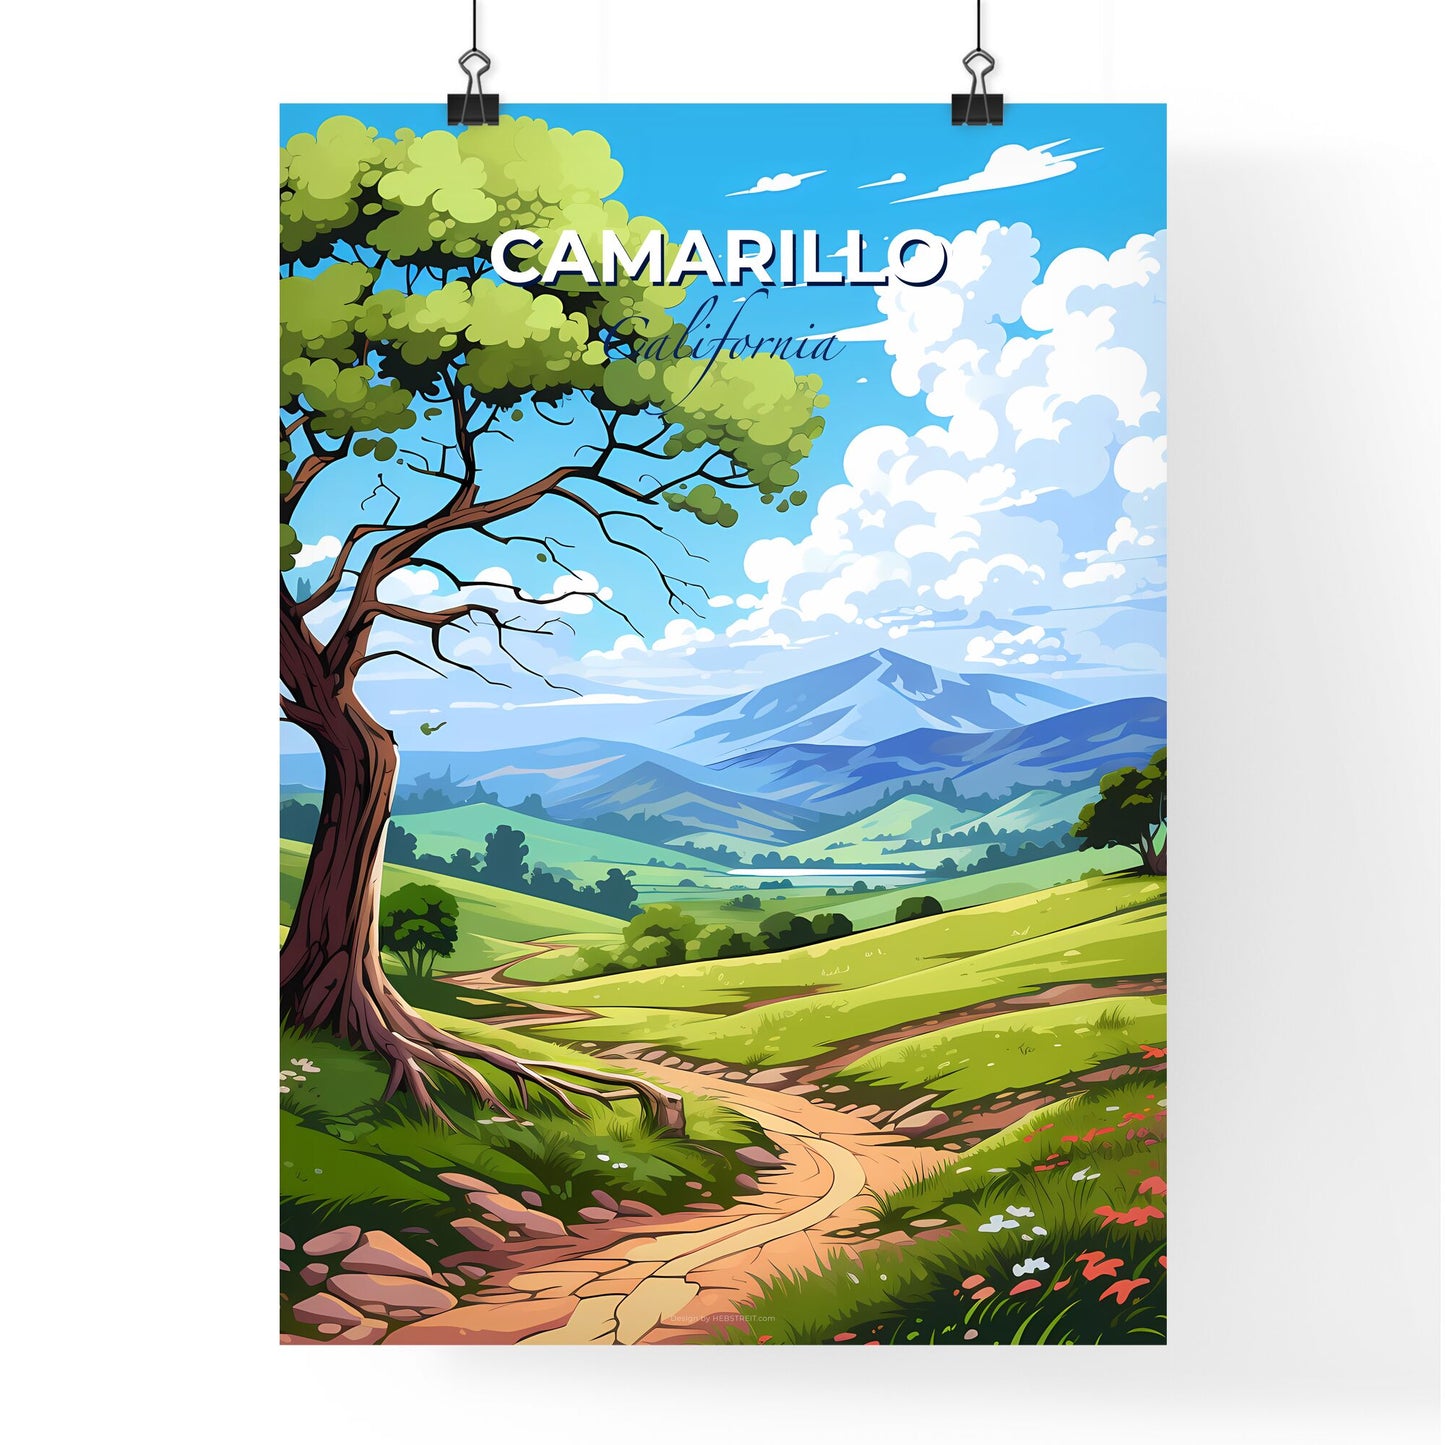 Camarillo, California, A Poster of a landscape with a tree and a dirt road Default Title